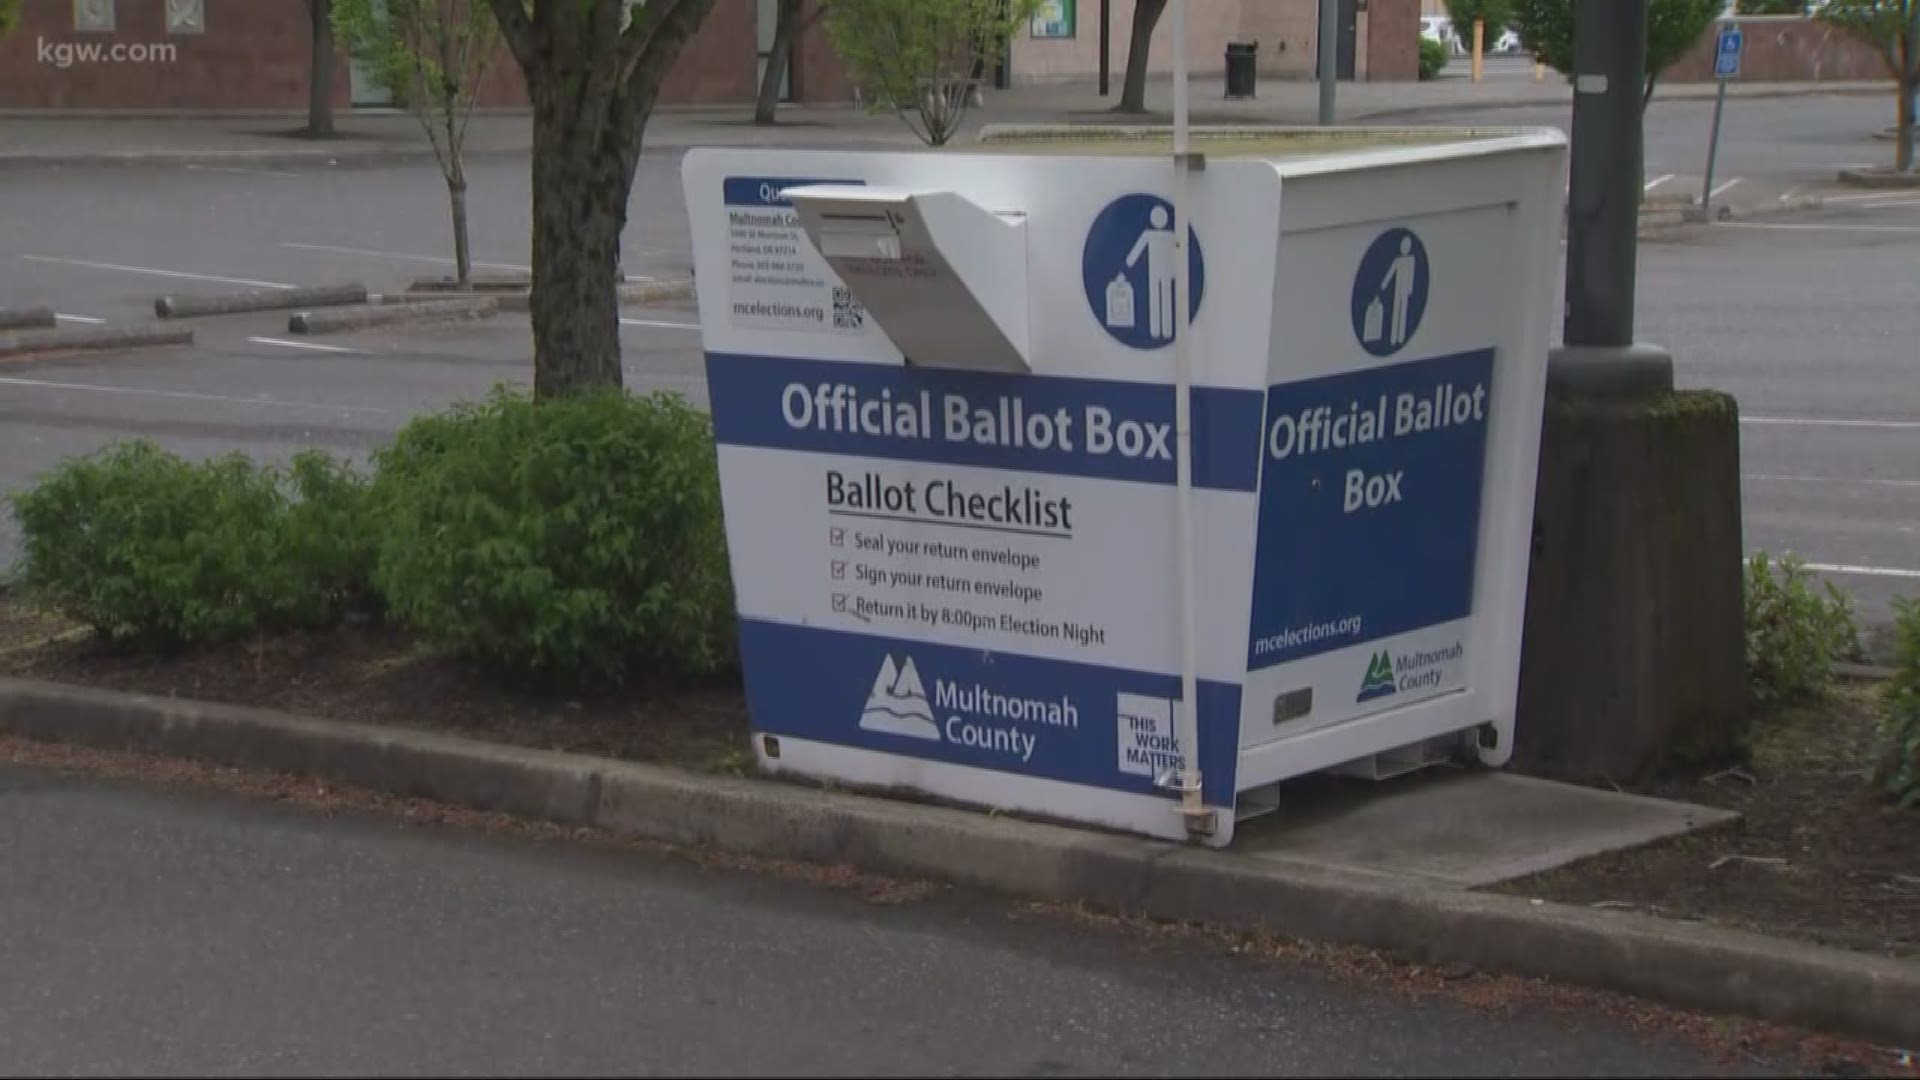 Oregon primary election happening today